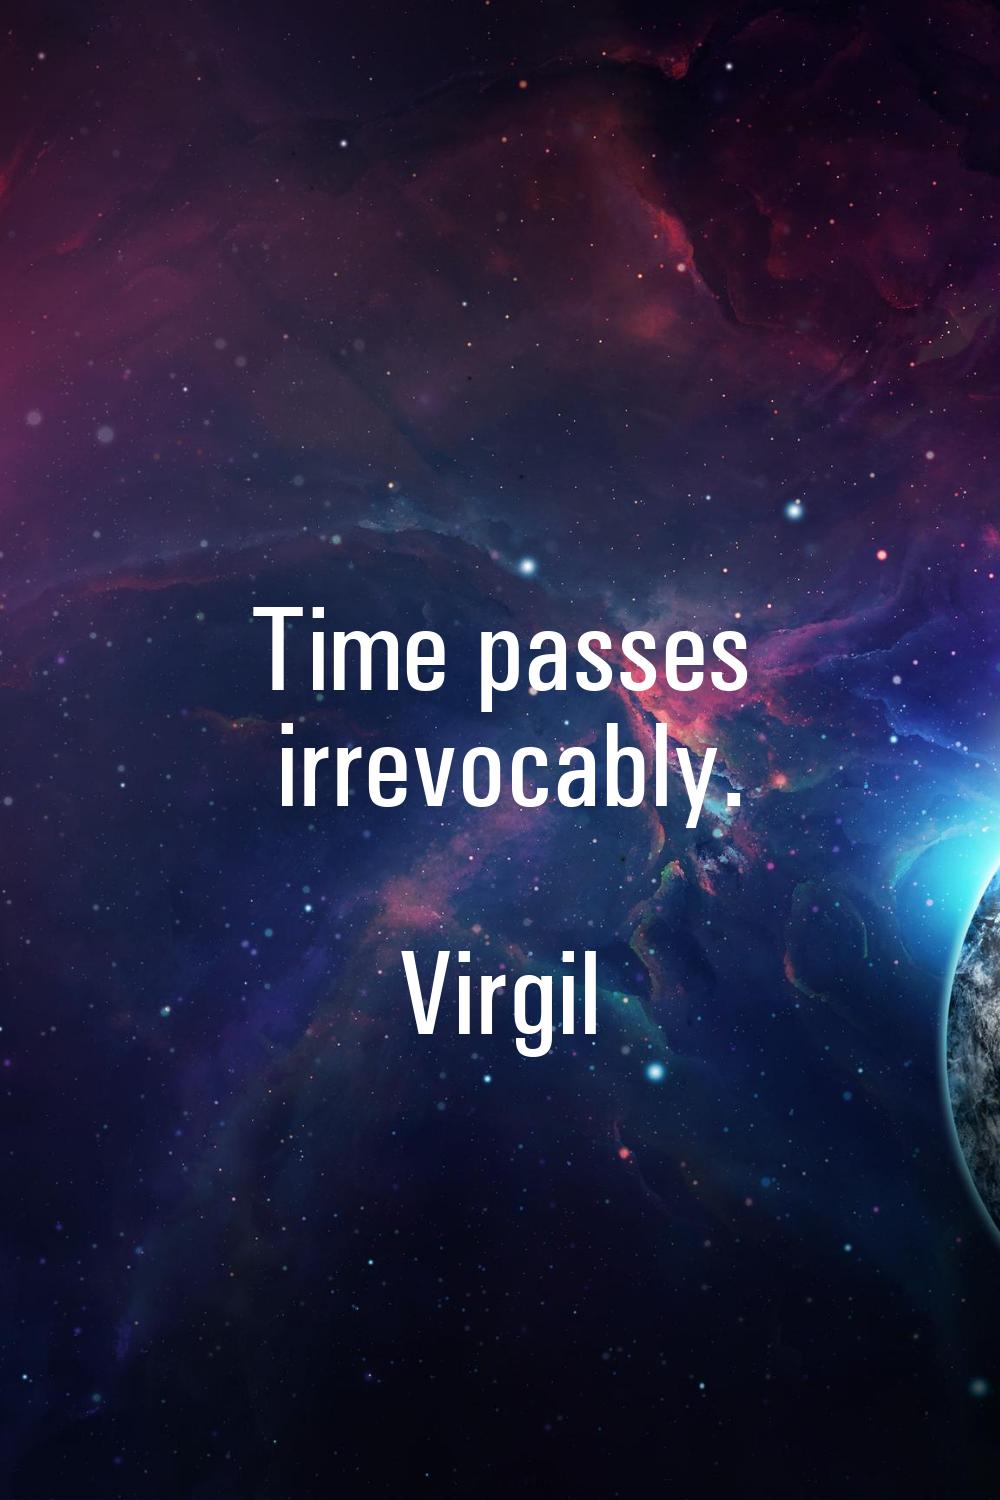 Time passes irrevocably.